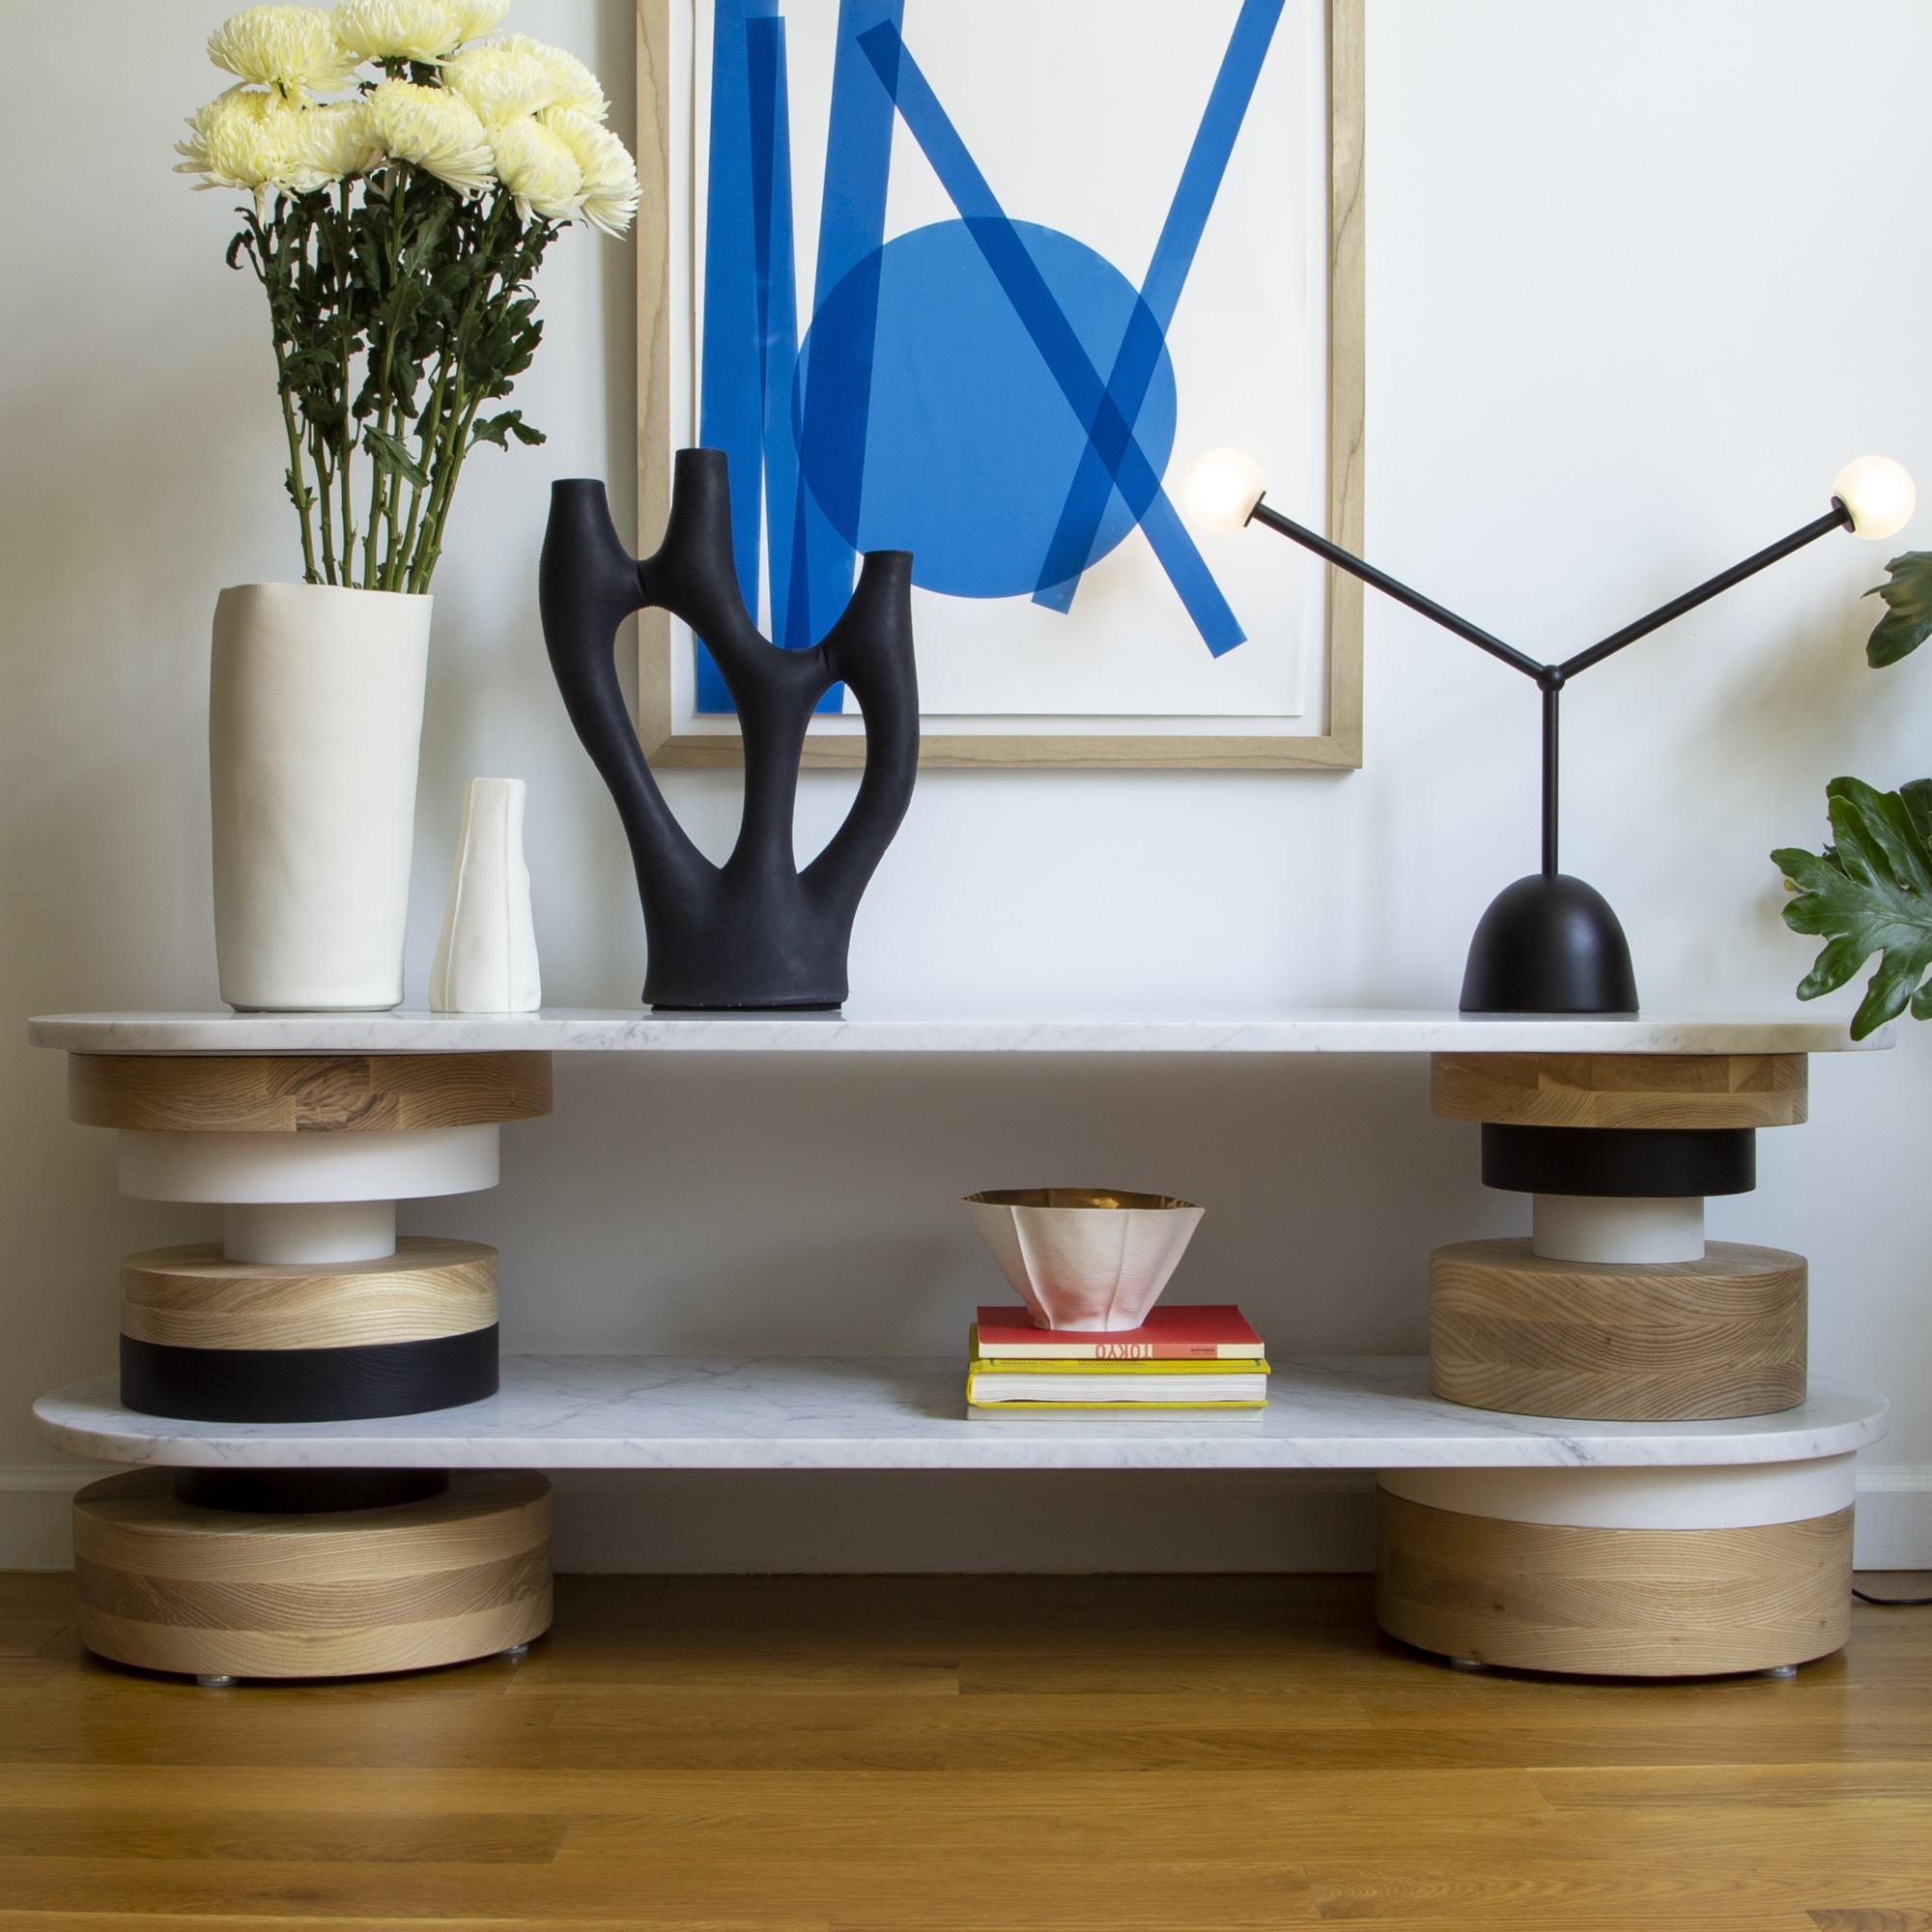 The Sottsass-inspired “Sass Console Table” is a bold, graphic statement piece. A honed Carrara marble top sits on an Amish-made base composed of painted and stacked wood circles. Made to order.

The version as shown in the first image is 18